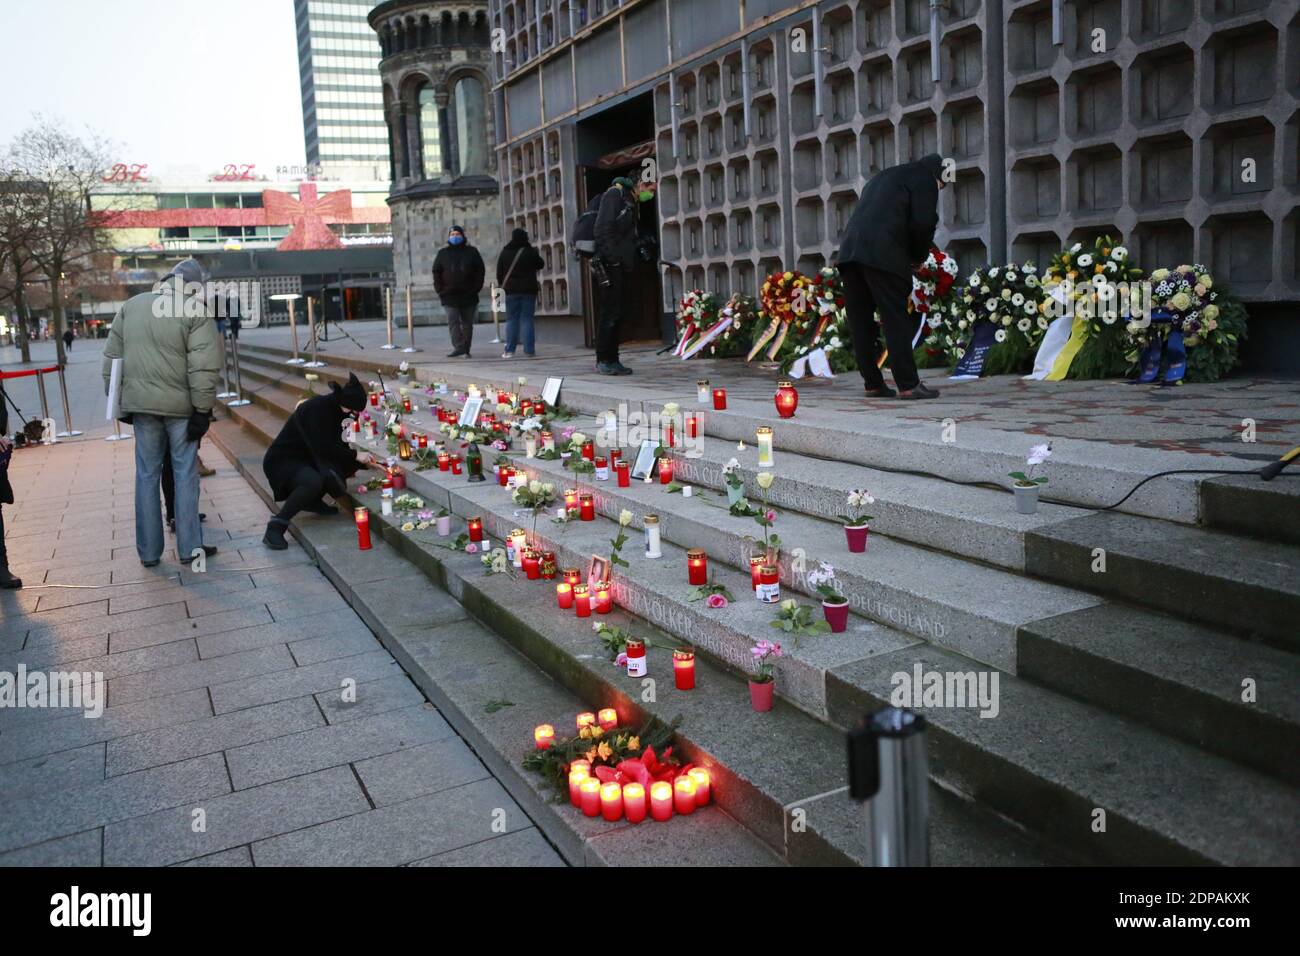 12/19/2020, Berlin, Germany, Four years after the terrorist attack on Breitscheidplatz there is a silent commemoration of the victims On December 19, 2016, the Islamist terrorist Anis Amri drove a truck into the Christmas market. Twelve people were killed. Stock Photo